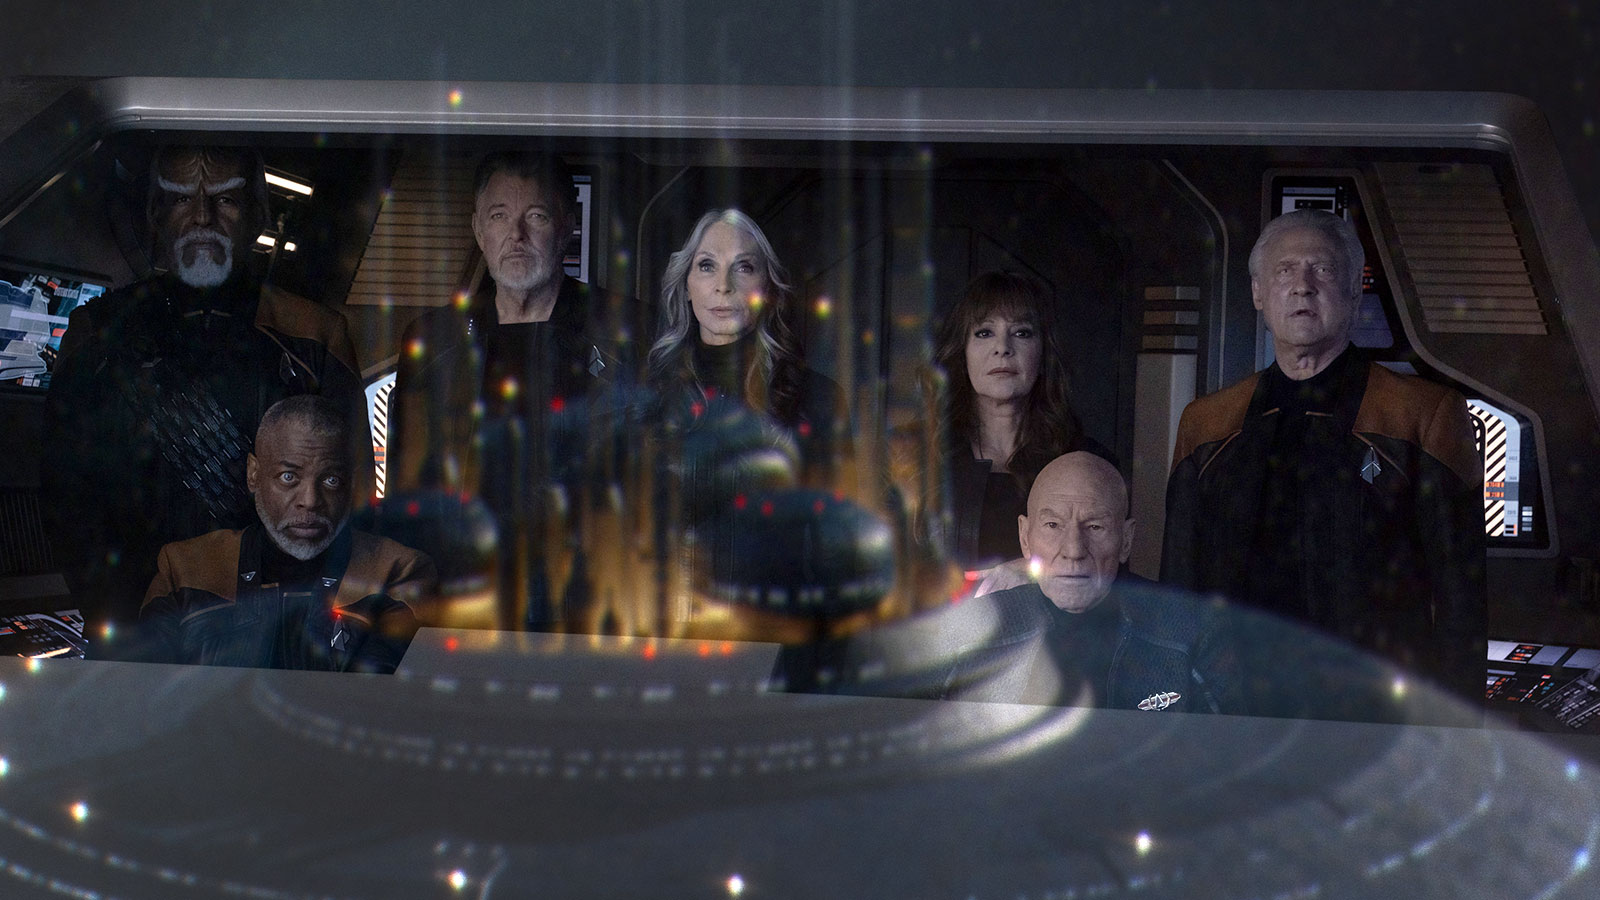 Star Trek: Picard Season 3 Episode 9 “Võx” Review: There's no place like home